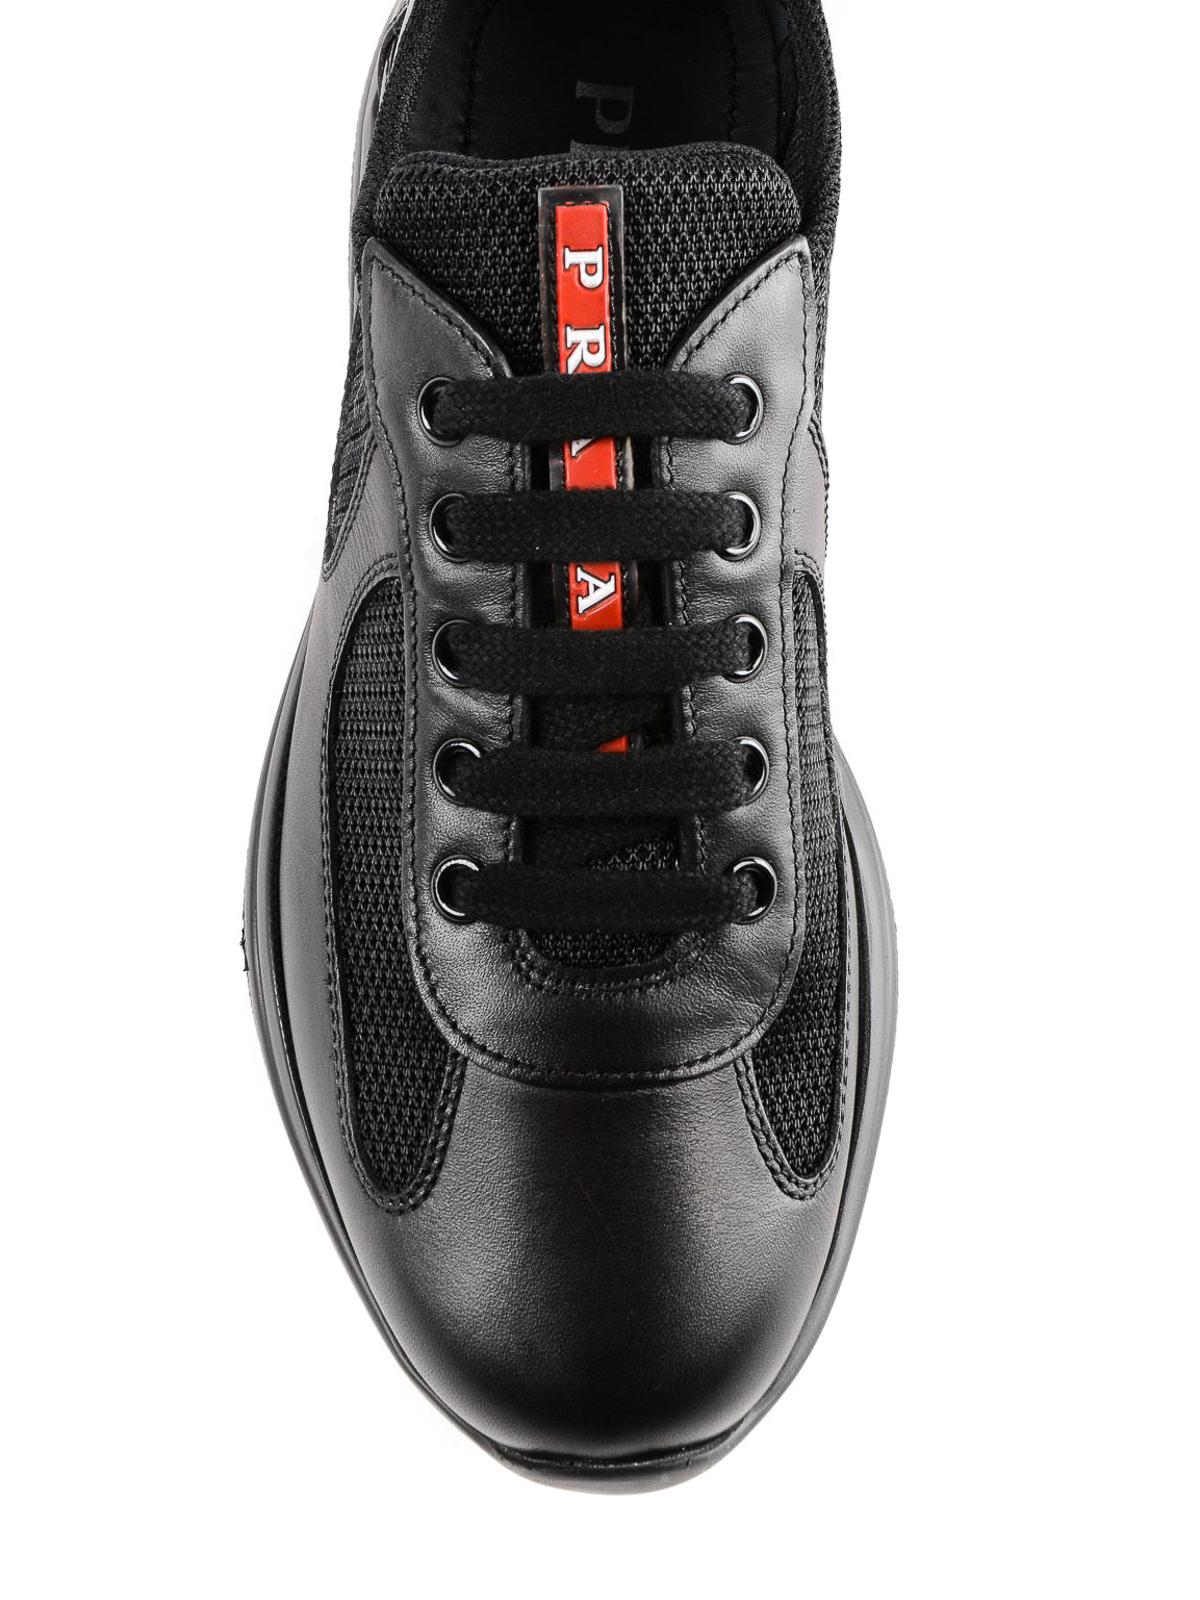 prada leather and technical fabric sneakers